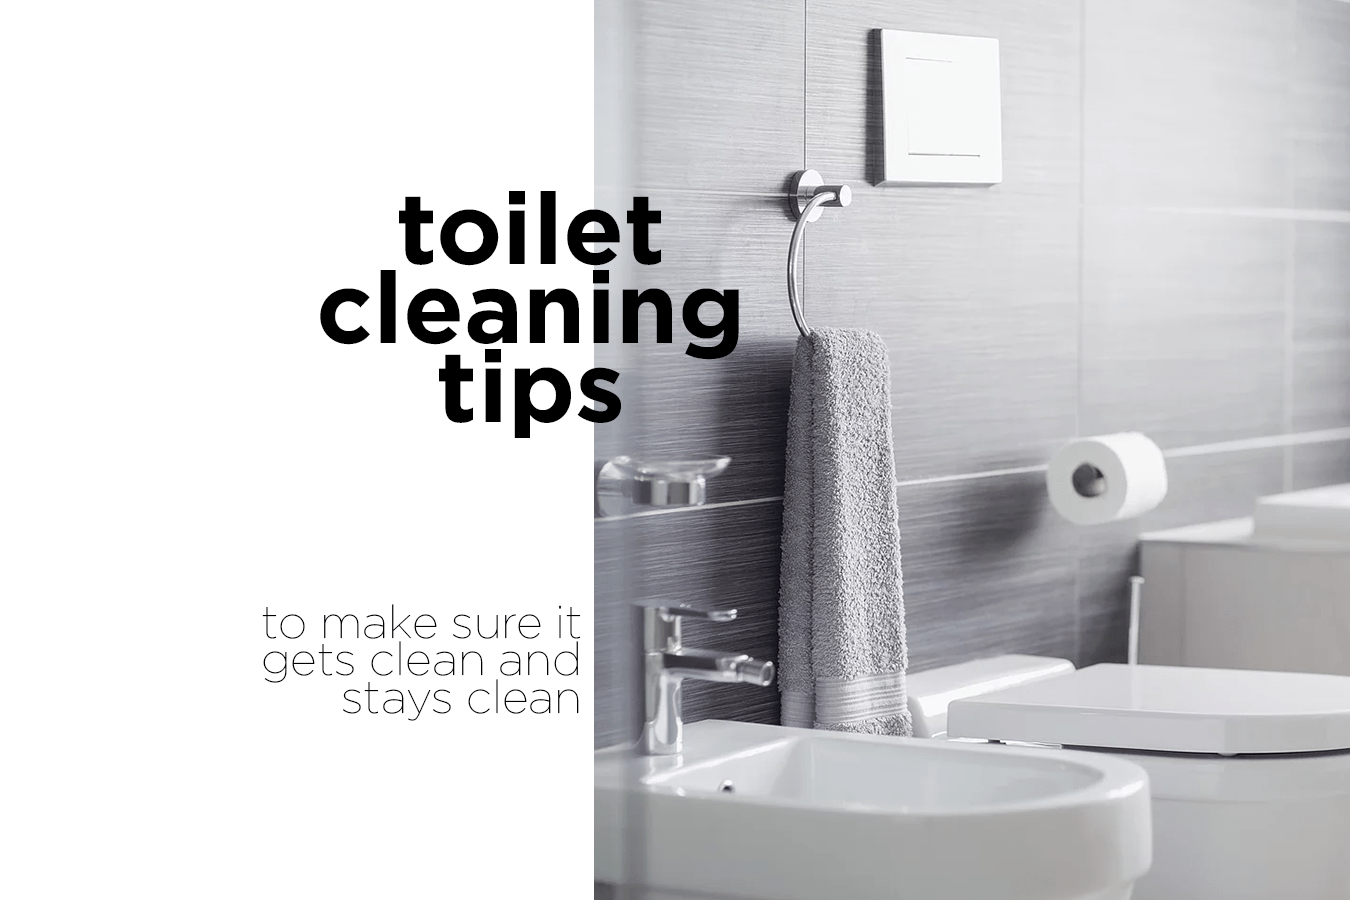 Toilet Cleaning 101 - Painless & Easy